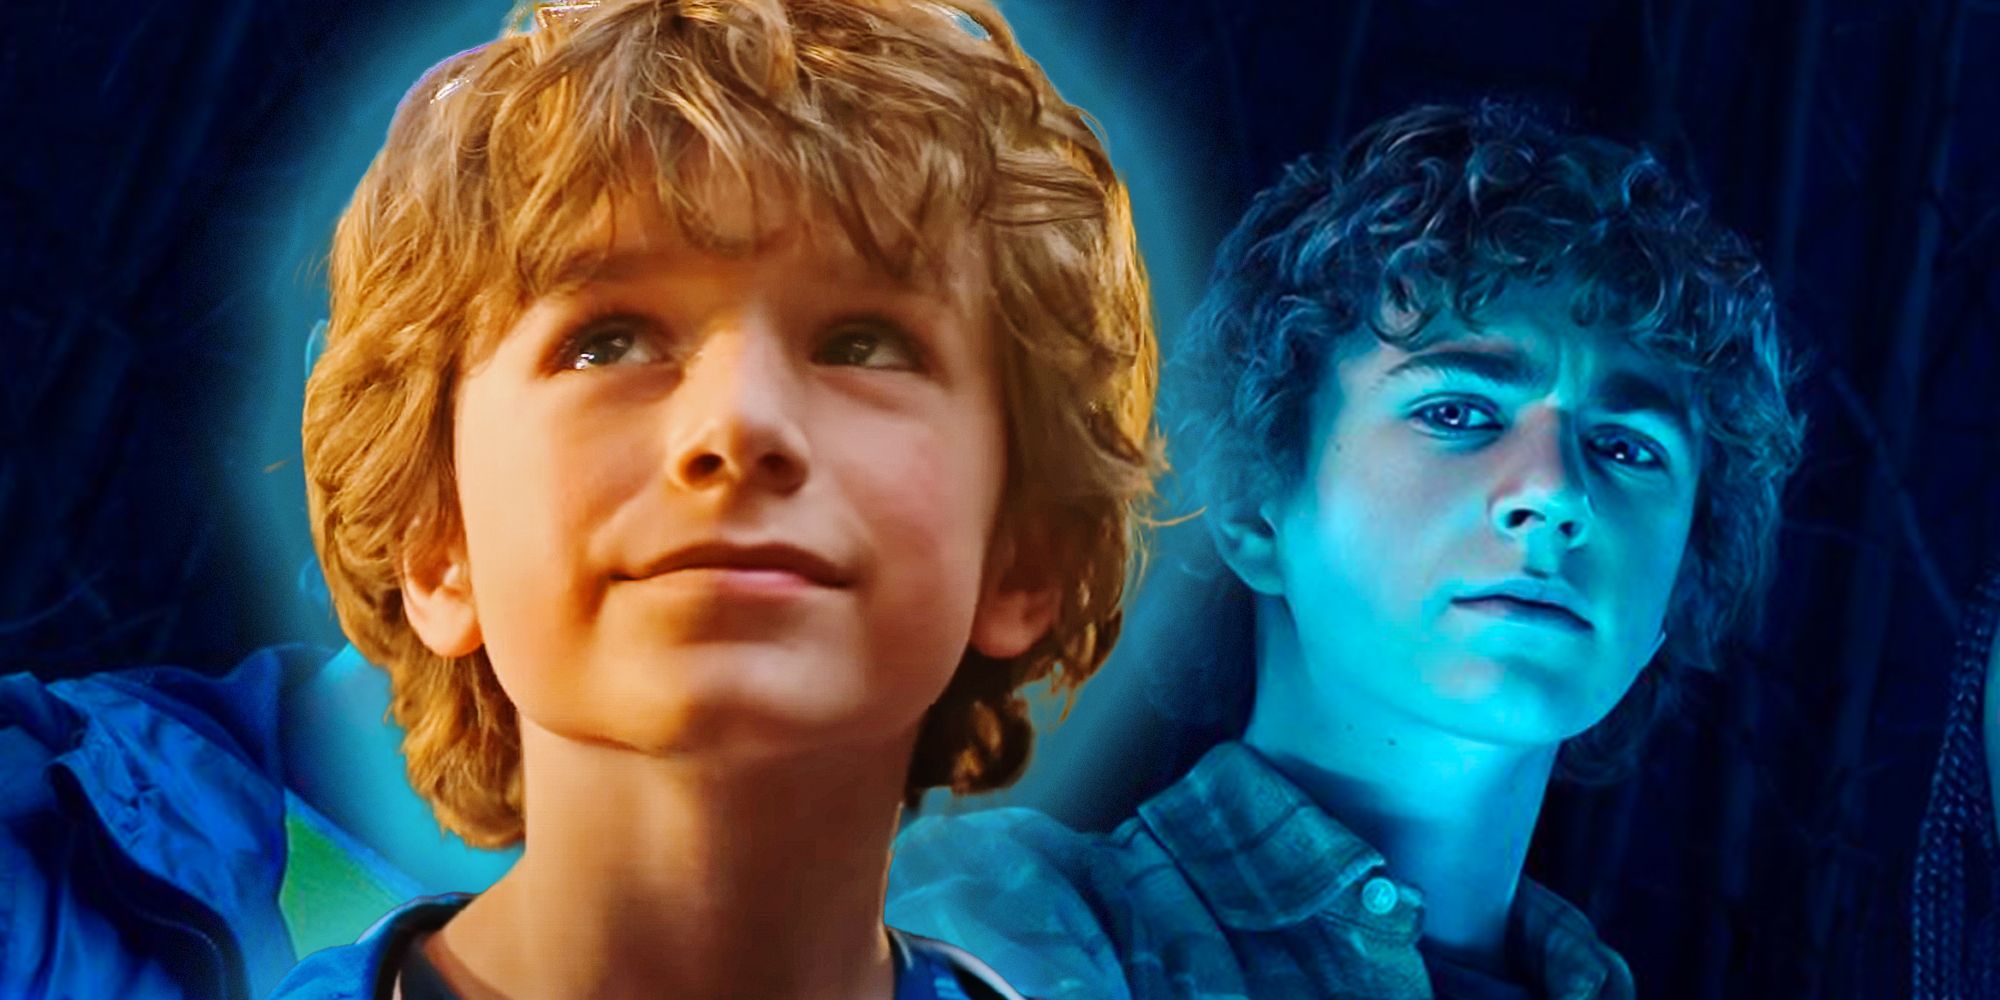 Percy Jackson and the Olympians' Review: Disney's Pleasant Kid Series